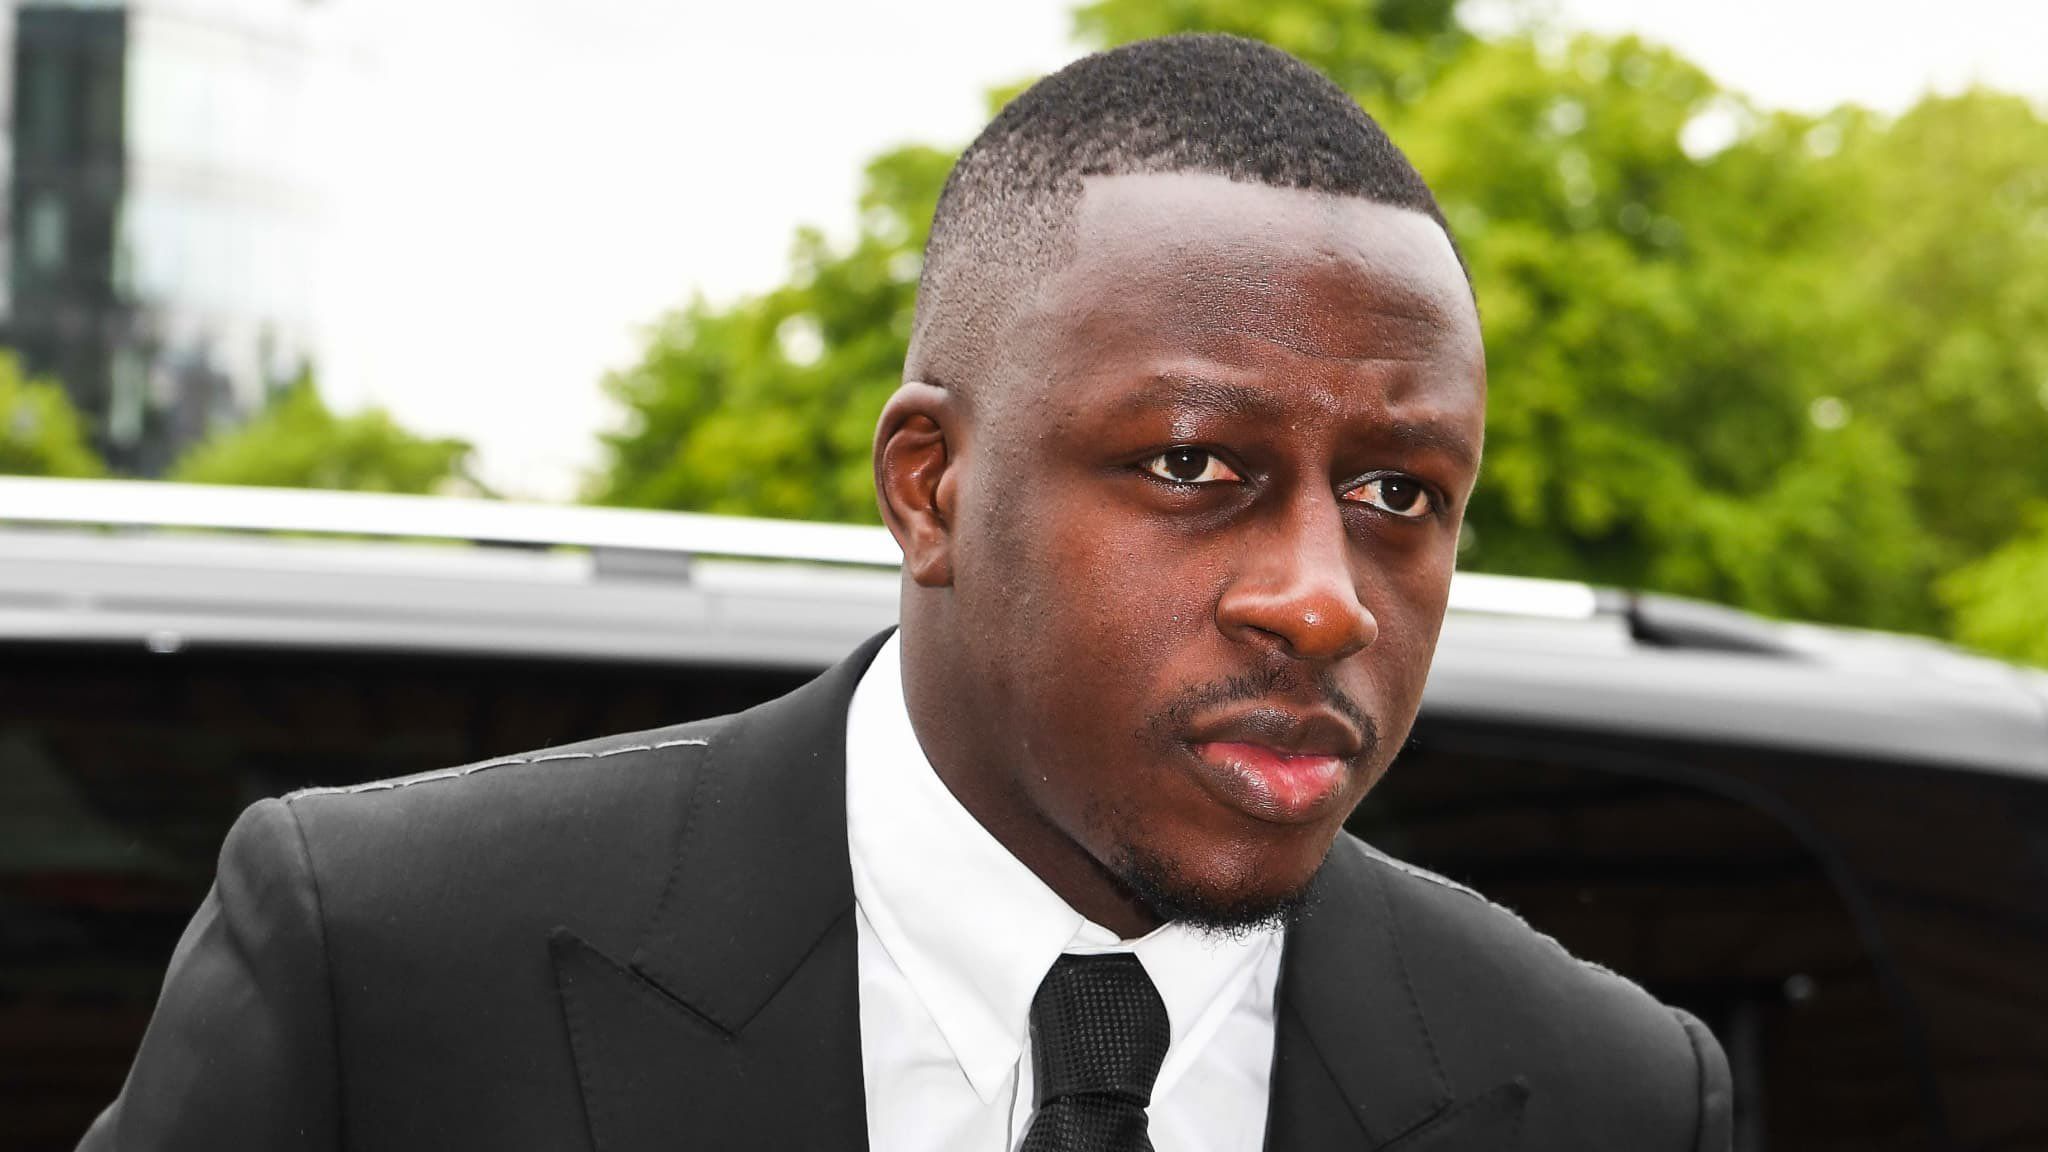 Manchester City’s Benjamin Mendy found not guilty in seven out of nine sex crime charges